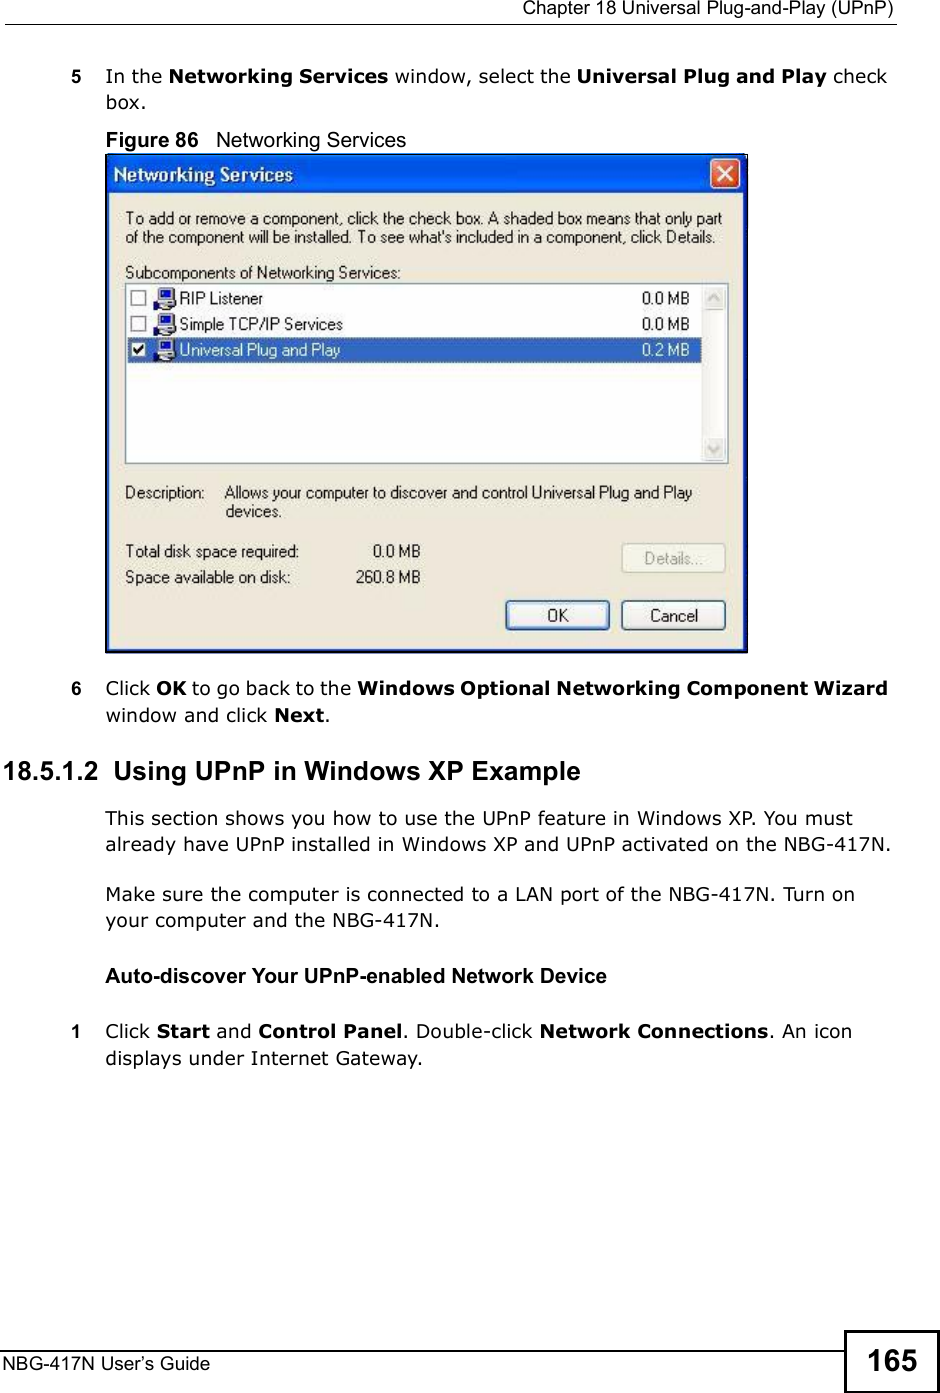  Chapter 18Universal Plug-and-Play (UPnP)NBG-417N User s Guide 1655In the Networking Services window, select the Universal Plug and Play check box. Figure 86   Networking Services6Click OK to go back to the Windows Optional Networking Component Wizard window and click Next. 18.5.1.2  Using UPnP in Windows XP ExampleThis section shows you how to use the UPnP feature in Windows XP. You must already have UPnP installed in Windows XP and UPnP activated on the NBG-417N.Make sure the computer is connected to a LAN port of the NBG-417N. Turn on your computer and the NBG-417N. Auto-discover Your UPnP-enabled Network Device1Click Start and Control Panel. Double-click Network Connections. An icon displays under Internet Gateway.